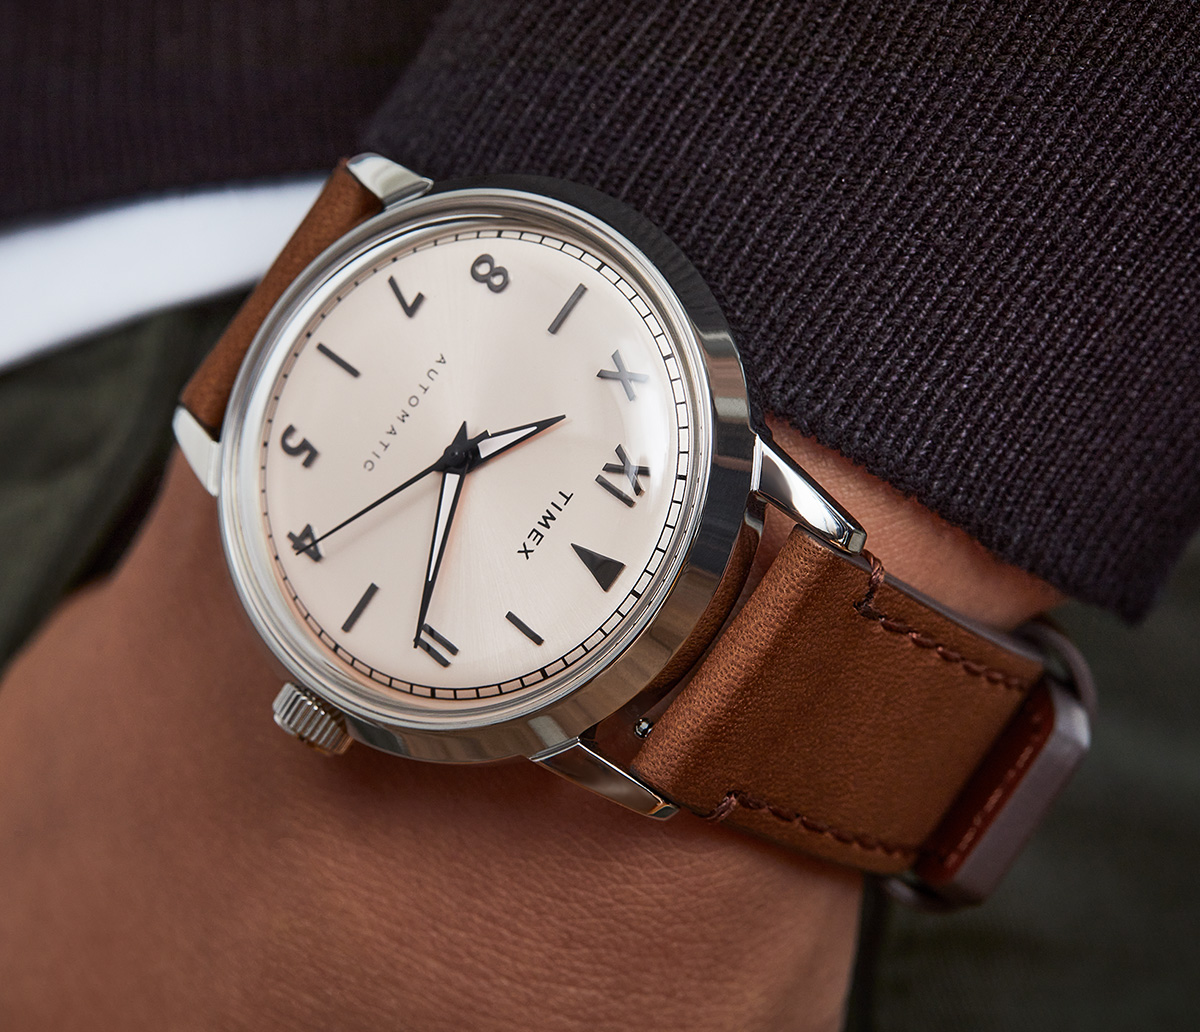 INTRODUCING: The Timex Marlin Automatic California brings a Cali dial to a new price point